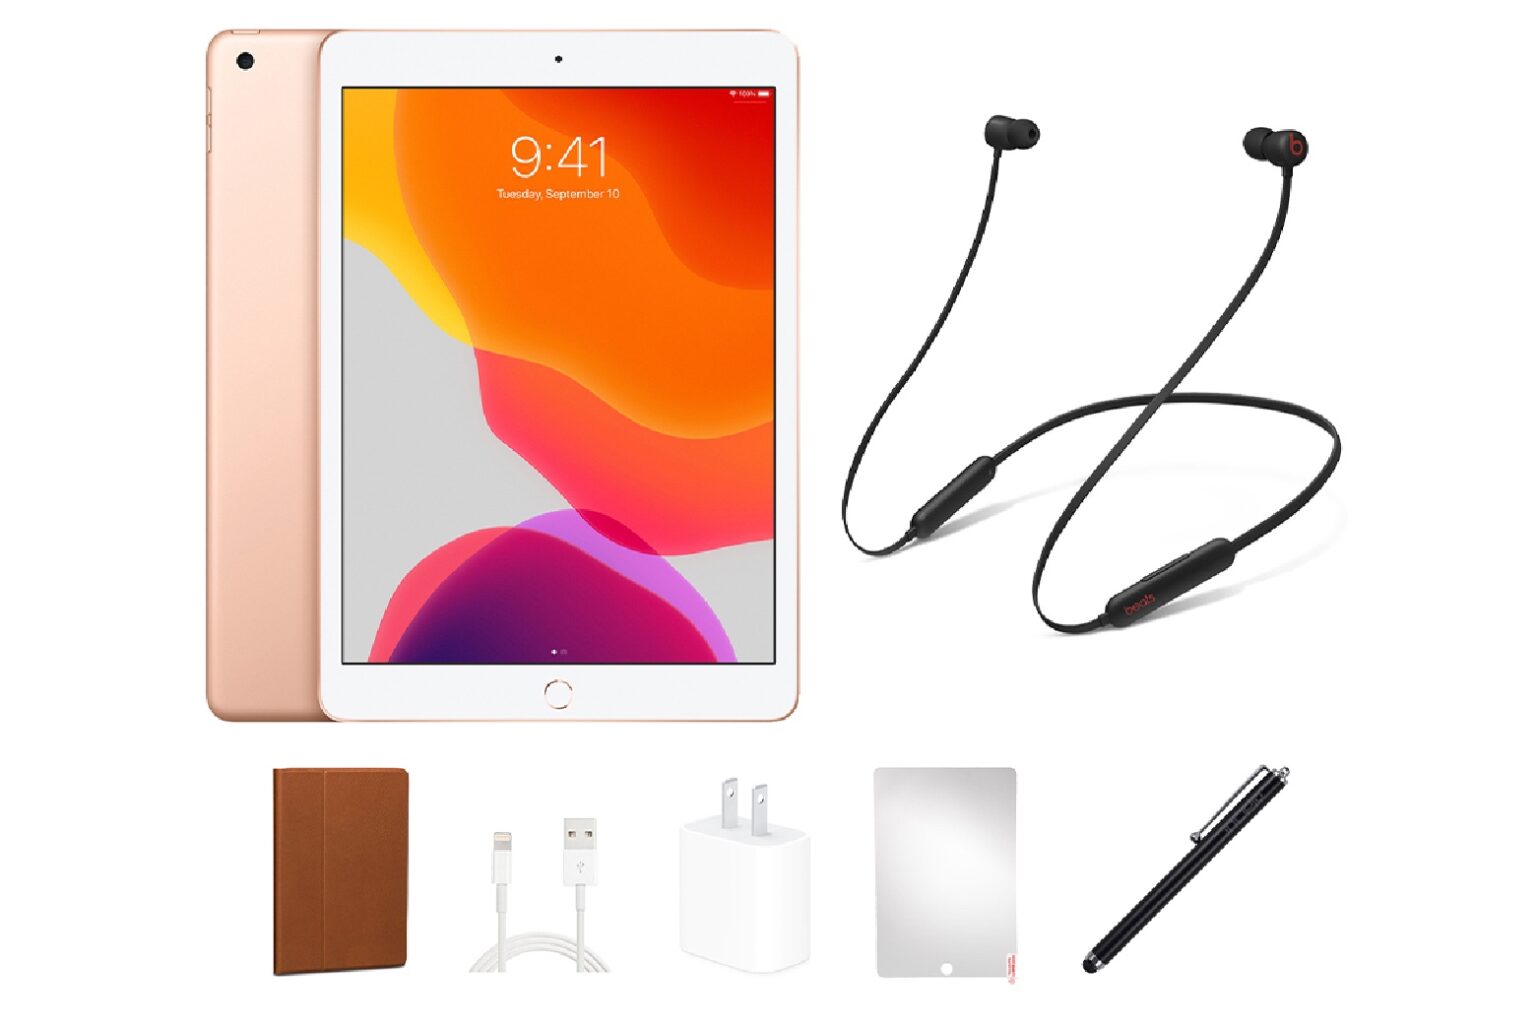 Score early Black Friday savings on this near-mint iPad with renewed new Beats headphones, now just $220.